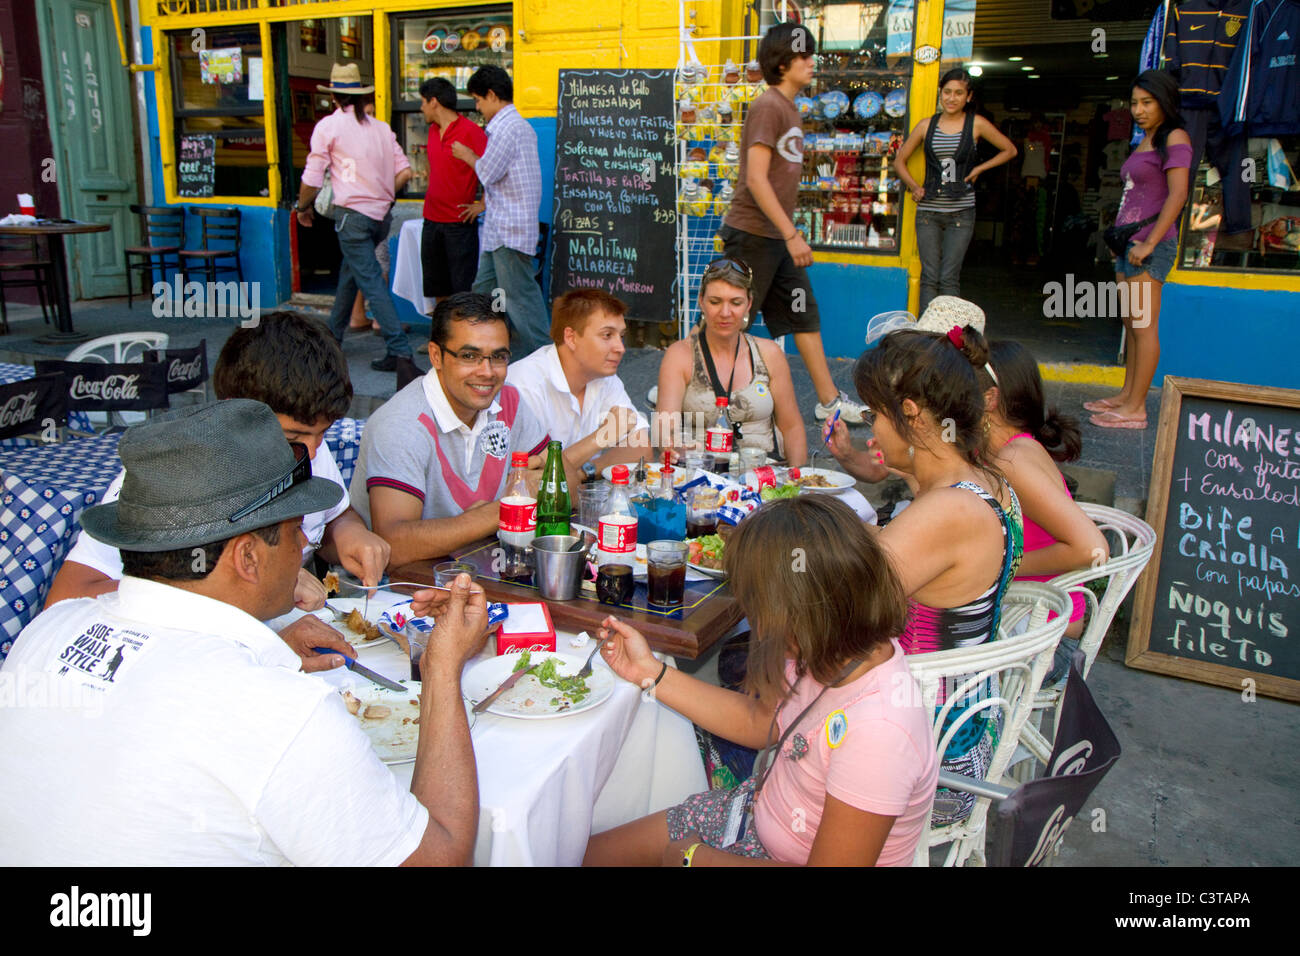 People dine at an outdoor cafe in the La Boca barrio of Buenos Aires, Argentina. Stock Photo